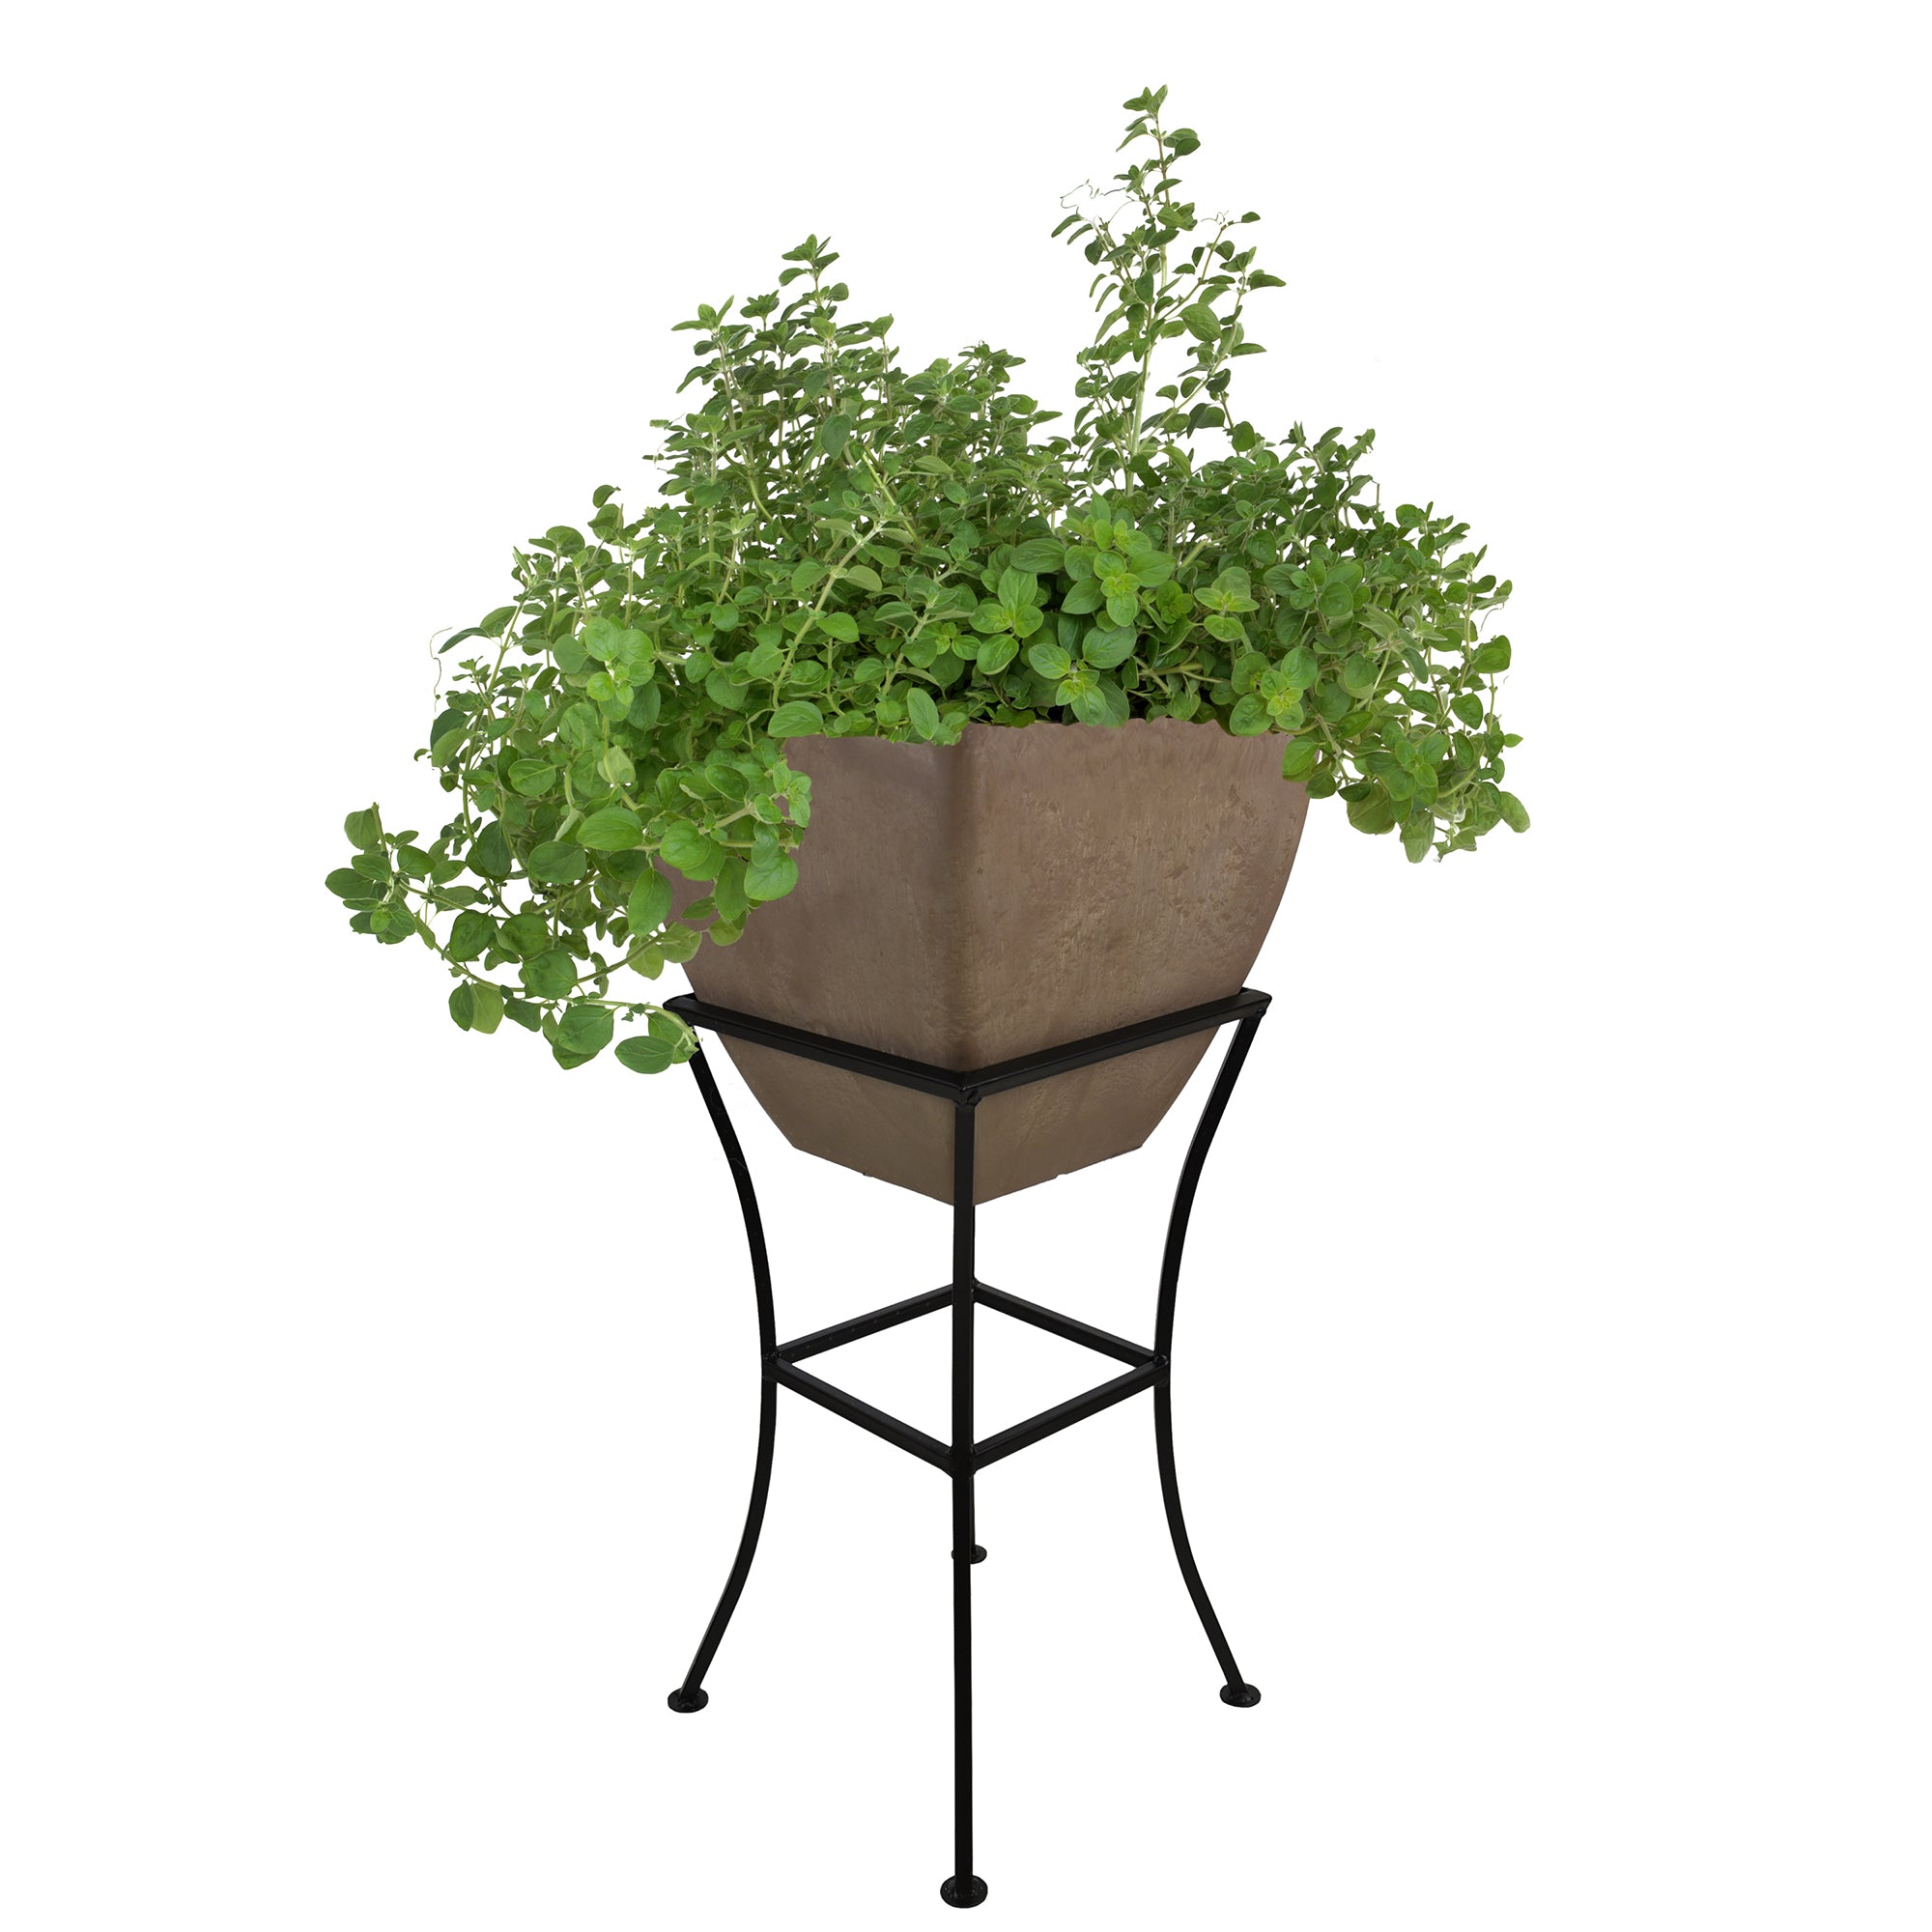 12 inch planter in oak with black stand and herbs inside on white background